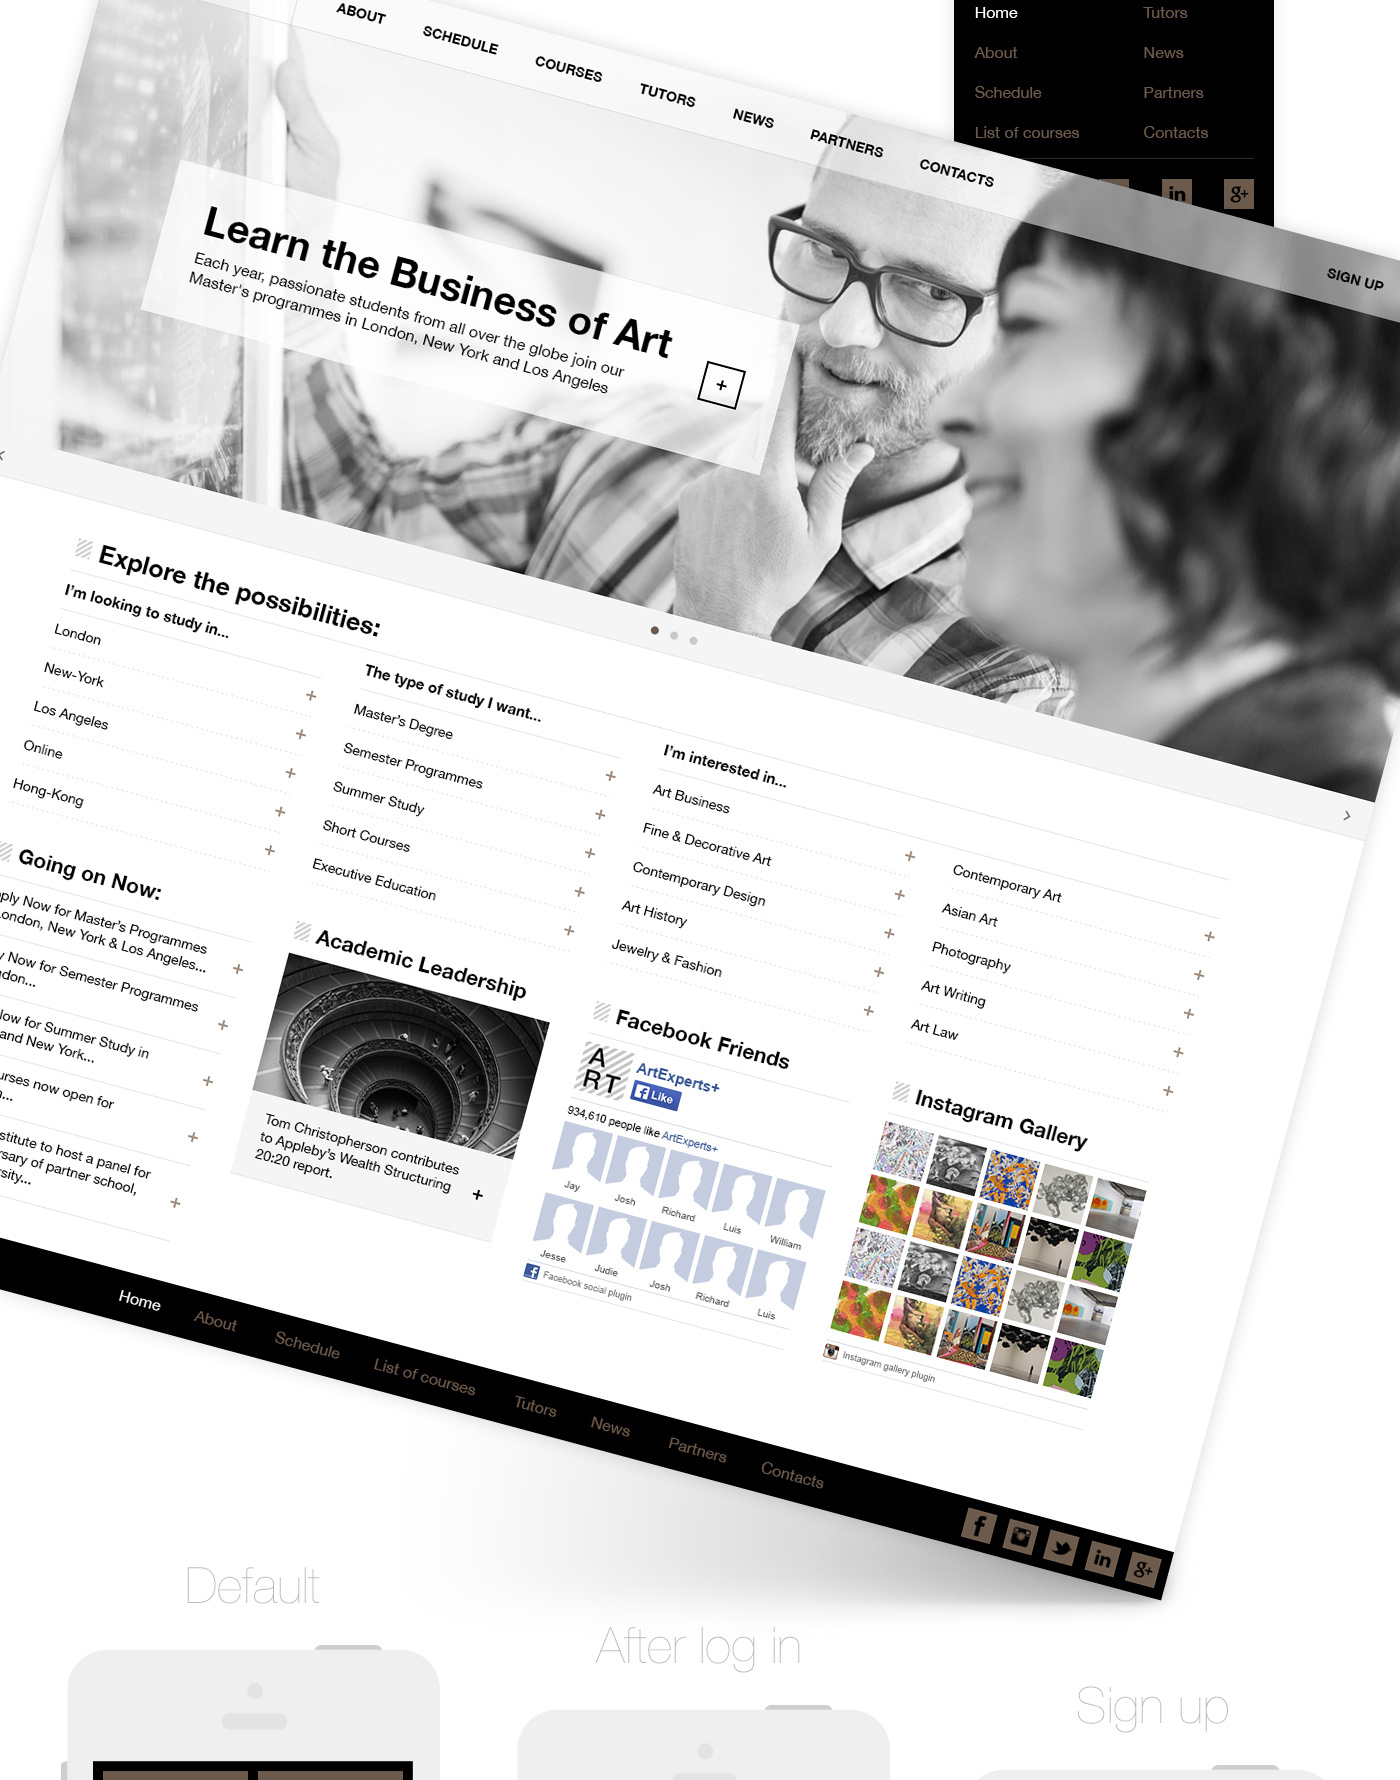 Web site design Responsive mobile first minimal art Education Adaptive concept expert gallery courses